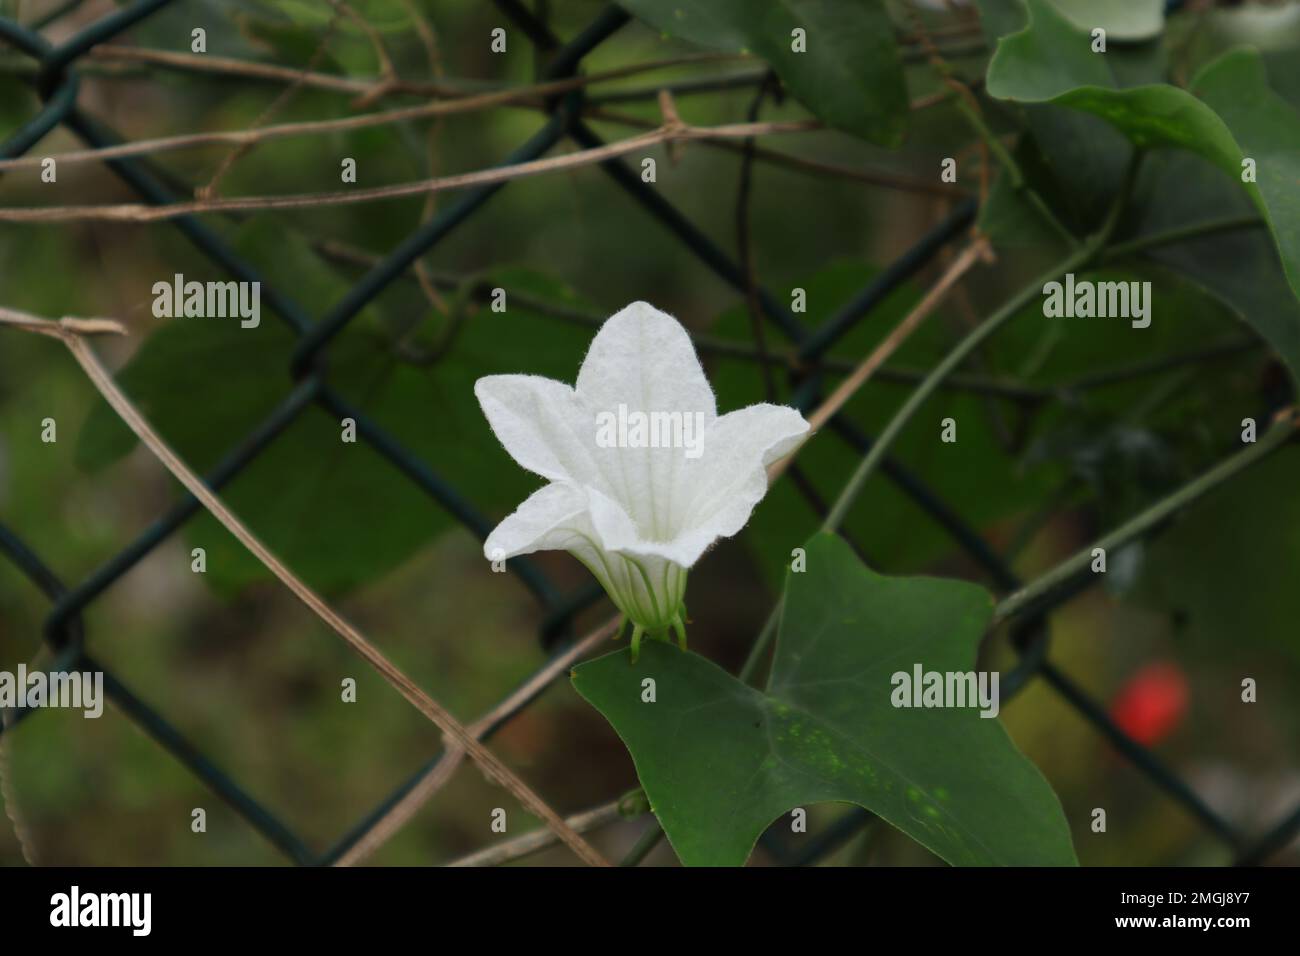 Close up of a white funnel shaped flower on a vine which is growing on a fence in the garden Stock Photo